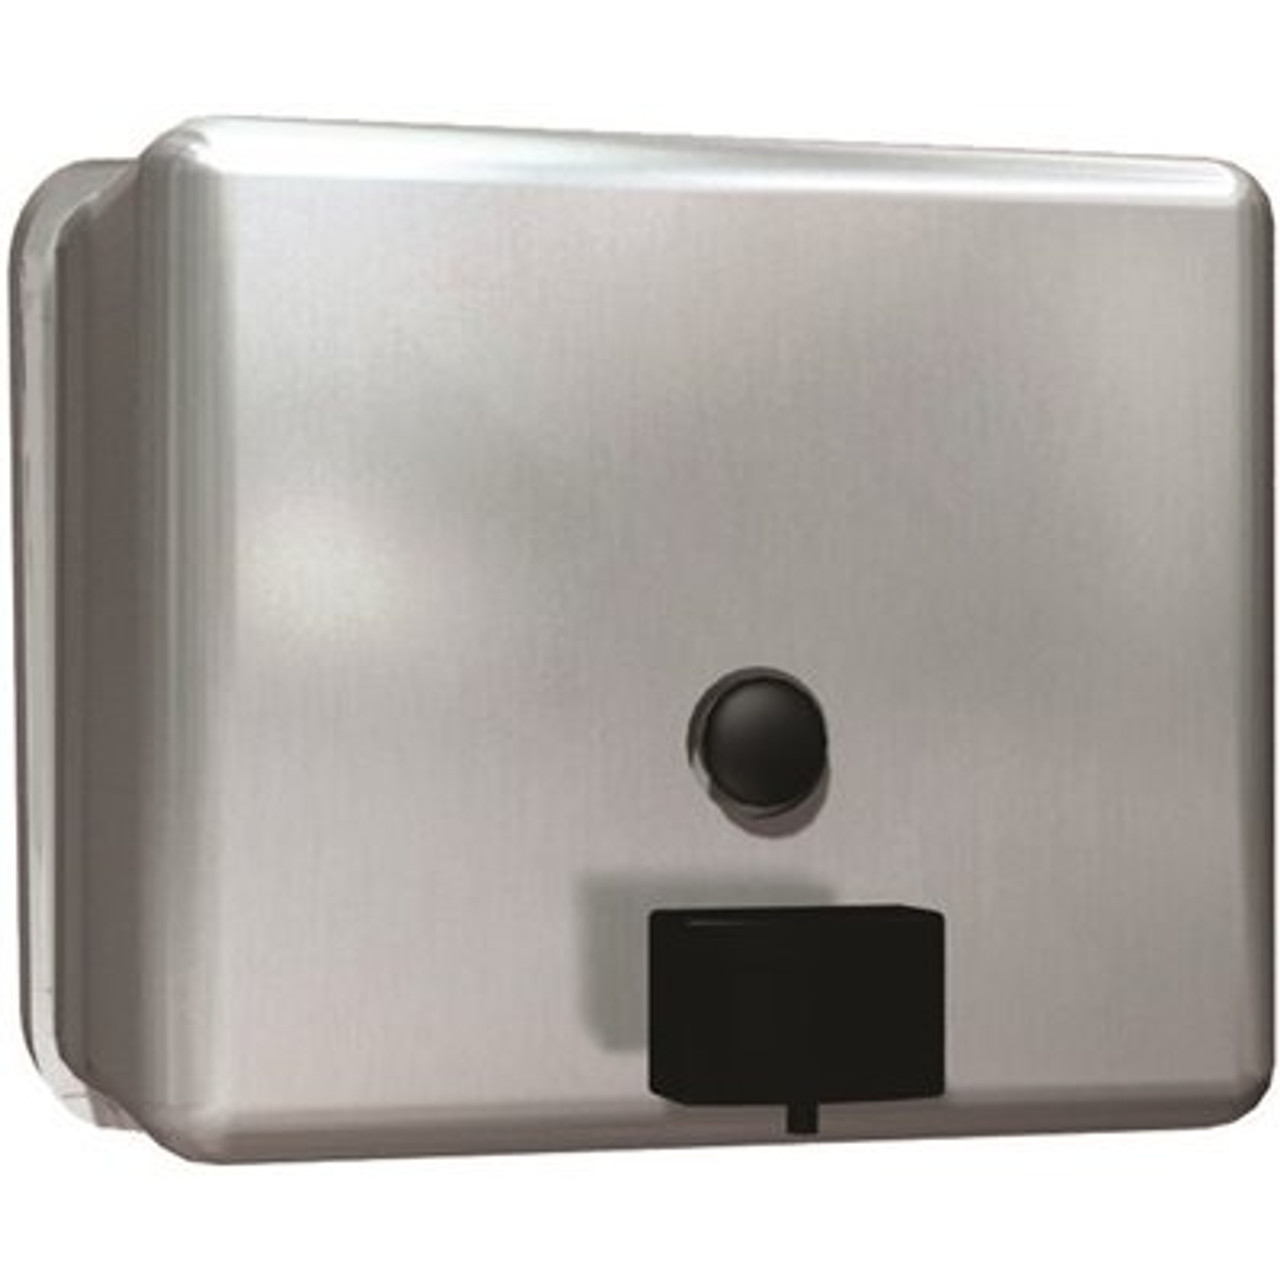 Surface Mounted Commercial Liquid Soap Dispenser in Stainless Steel